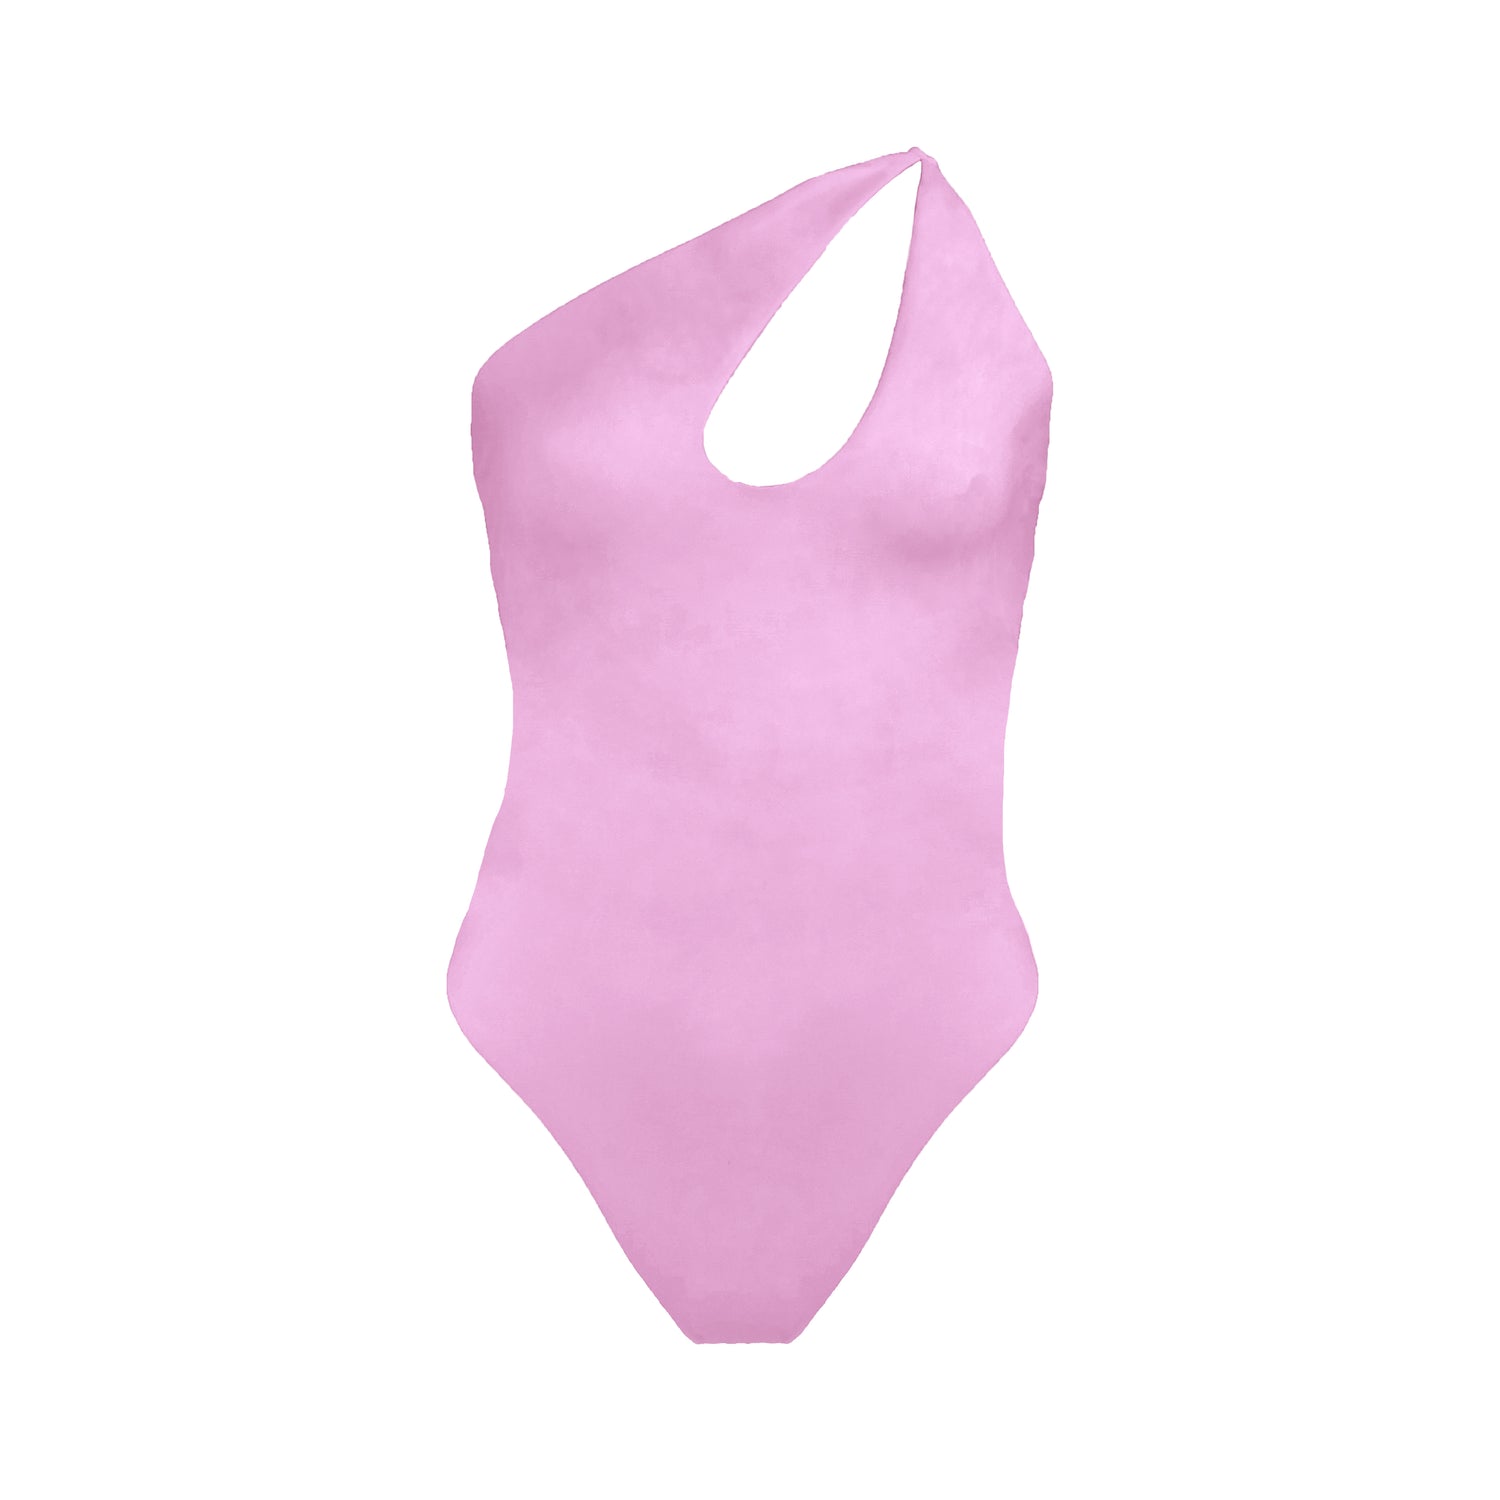 Pastel pink asymmetric Palermo one piece swimsuit with keyhole neckline cutout, high cut legs, and cheeky bum coverage.